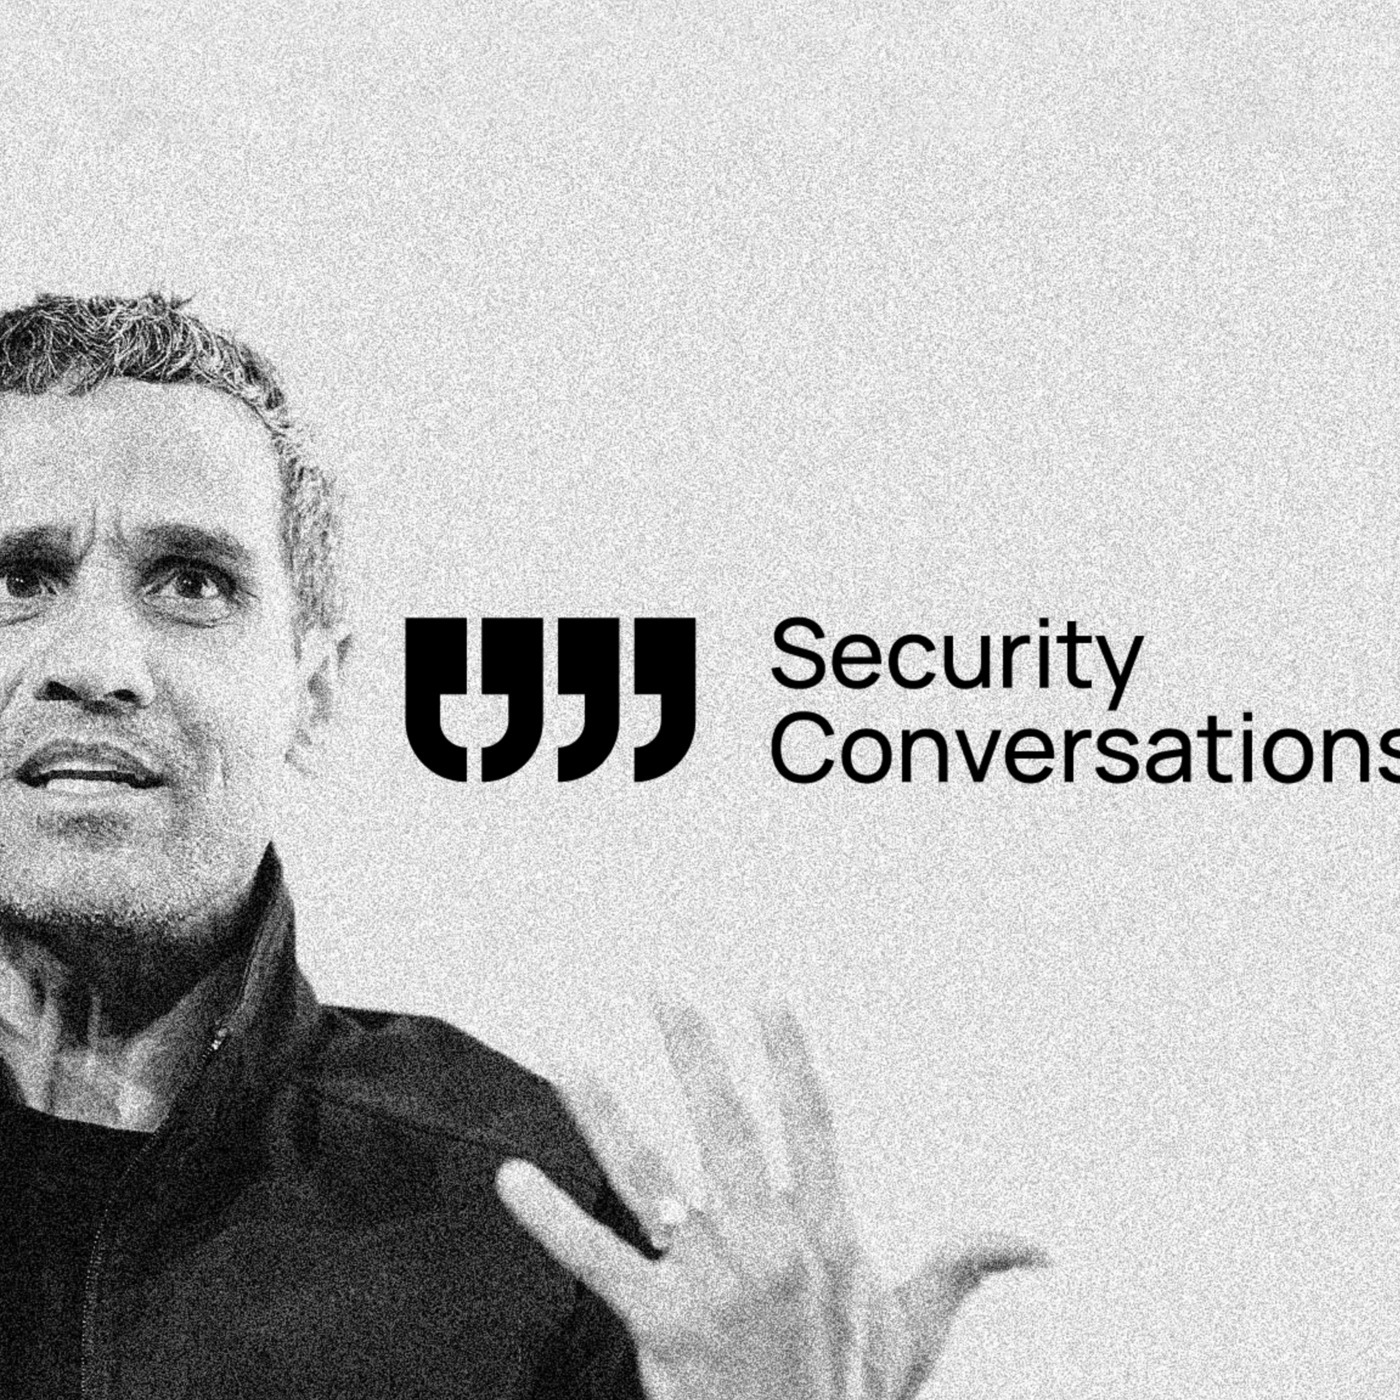 Security Conversations: Ep6: After CrowdStrike chaos, should Microsoft kick EDR agents out of Windows kernel?